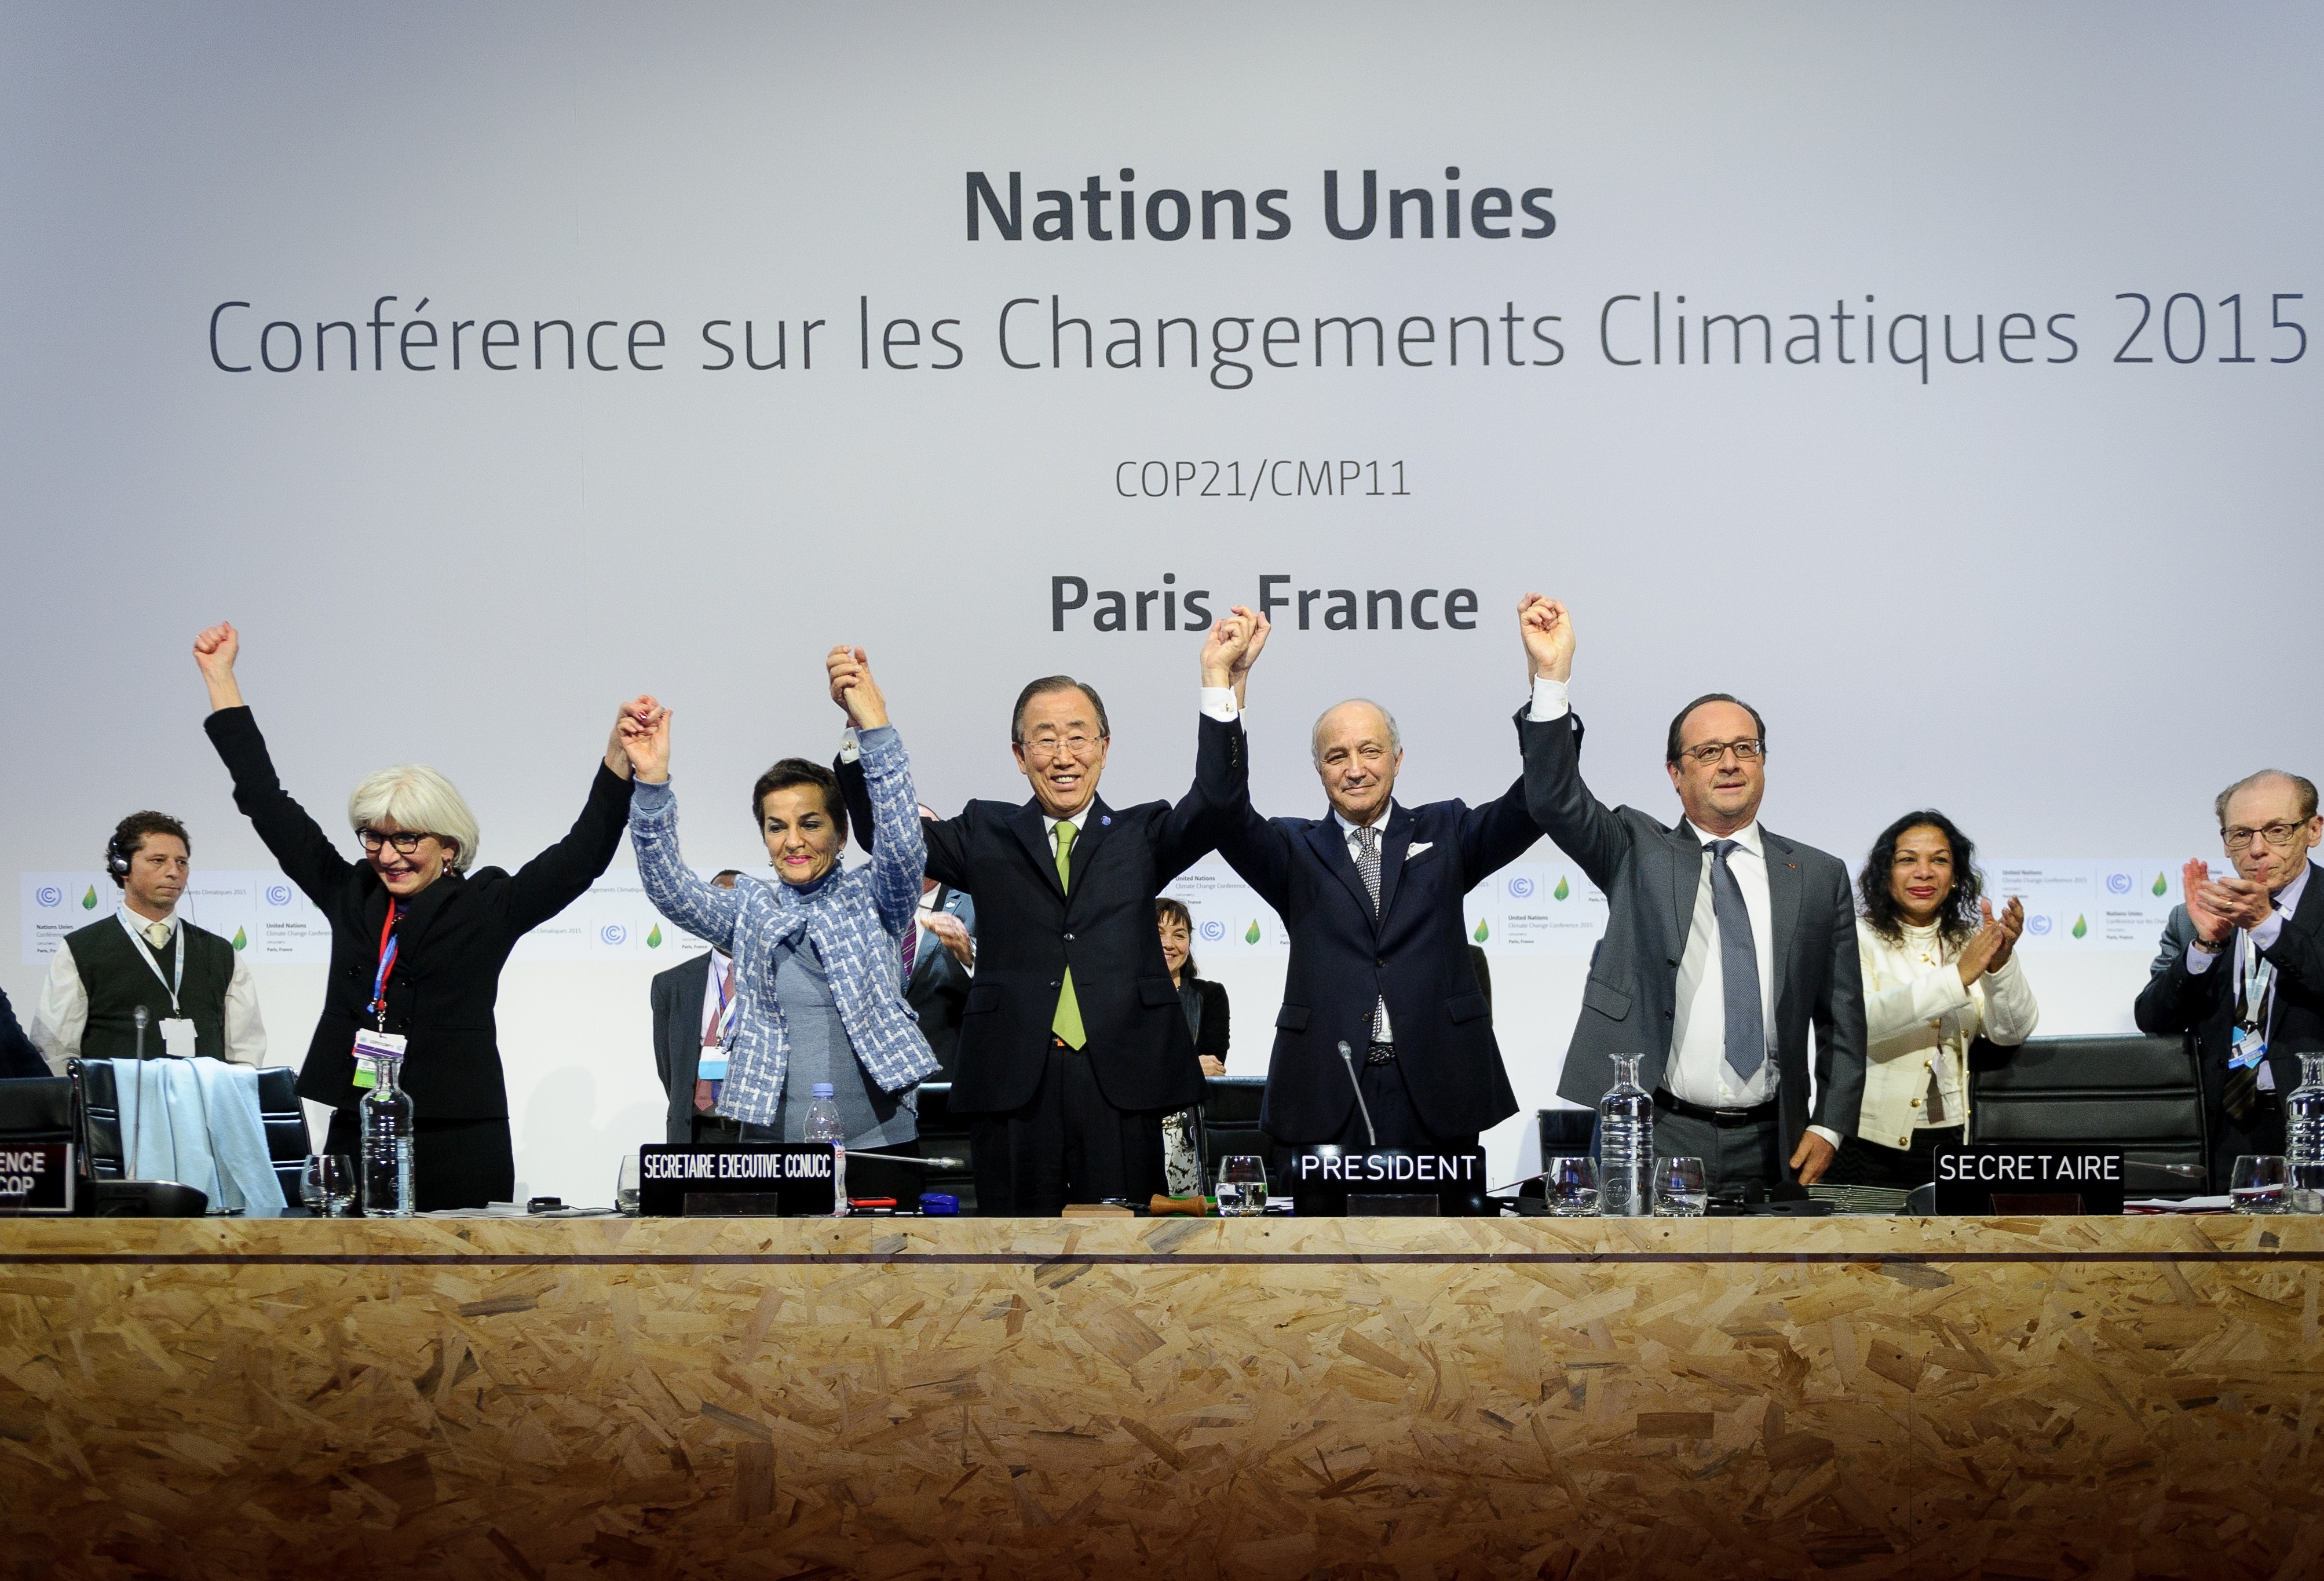 Executive Secretary of the United Nations Framework Convention on Climate Change Christiana Figueres, Secretary General of the United Nations Ban Ki Moon, Foreign Affairs Minister and President-designate of COP21 Laurent Fabius, and France's President Francois Hollande raise hands together after adoption of a historic global warming pact at the COP21 Climate Conference in Le Bourget, north of Paris, on Dec. 12, 2015. (Anadolu Agency—Getty Images)